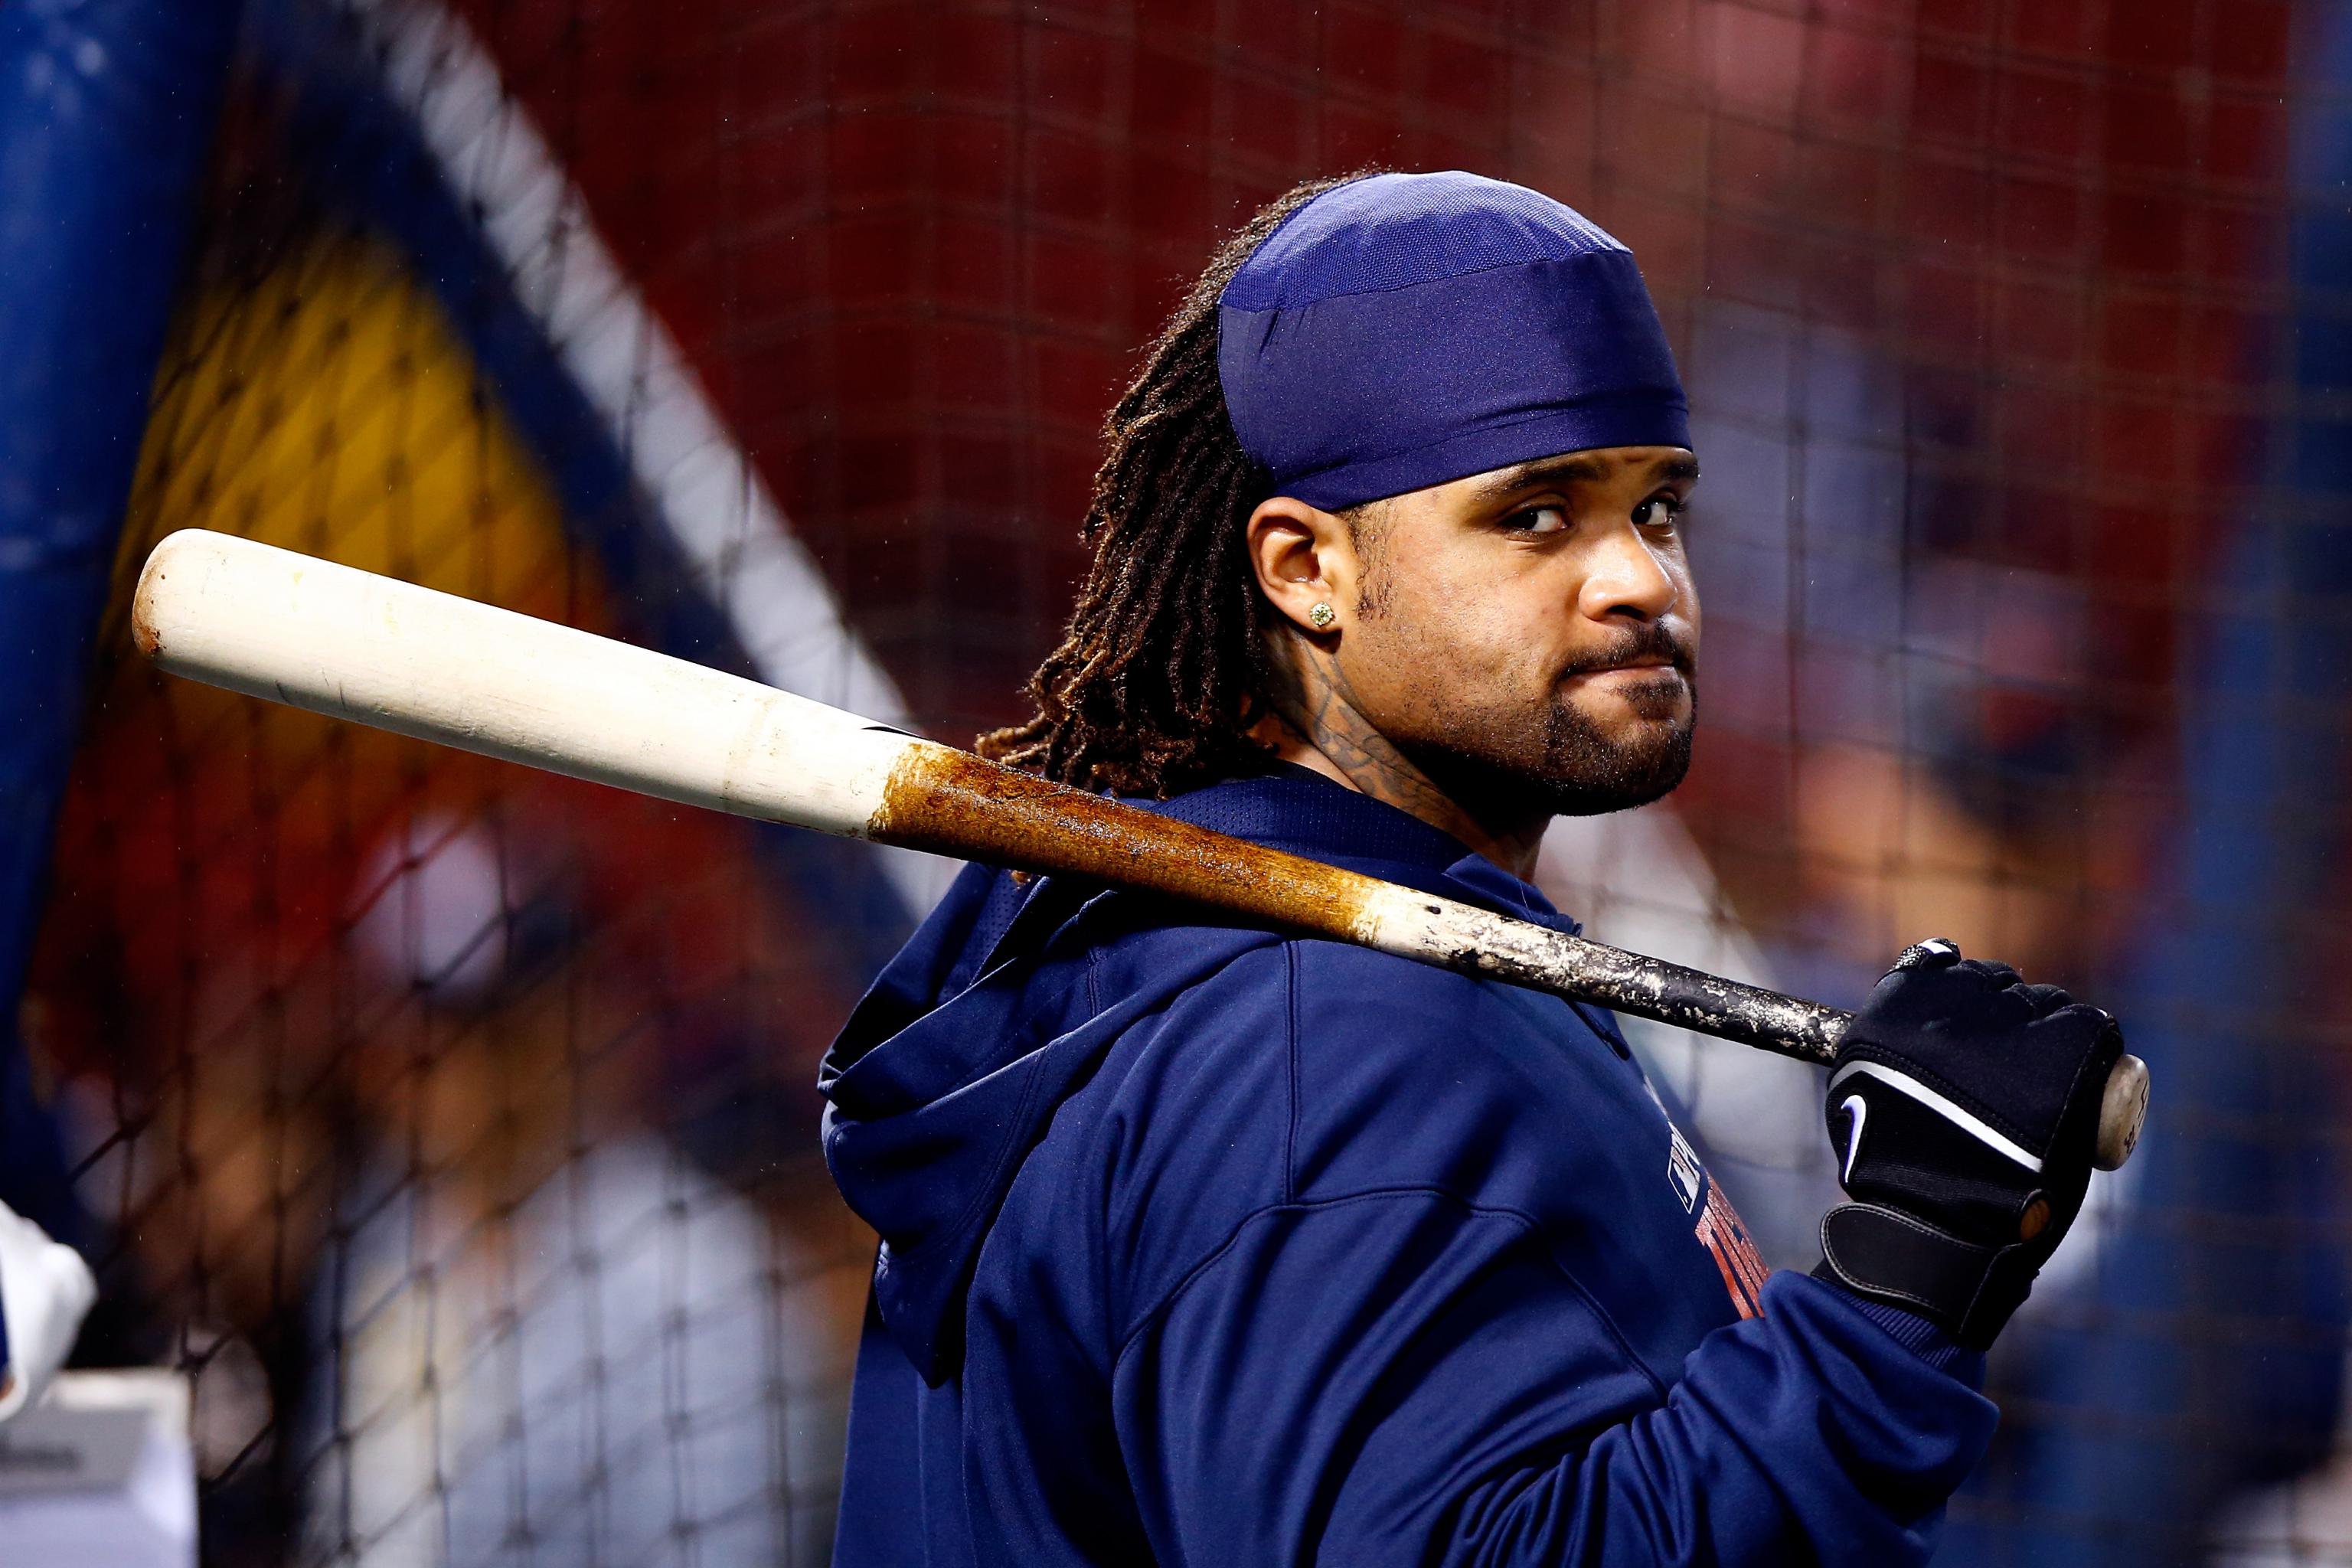 Previewing The Market For Prince Fielder - MLB Trade Rumors